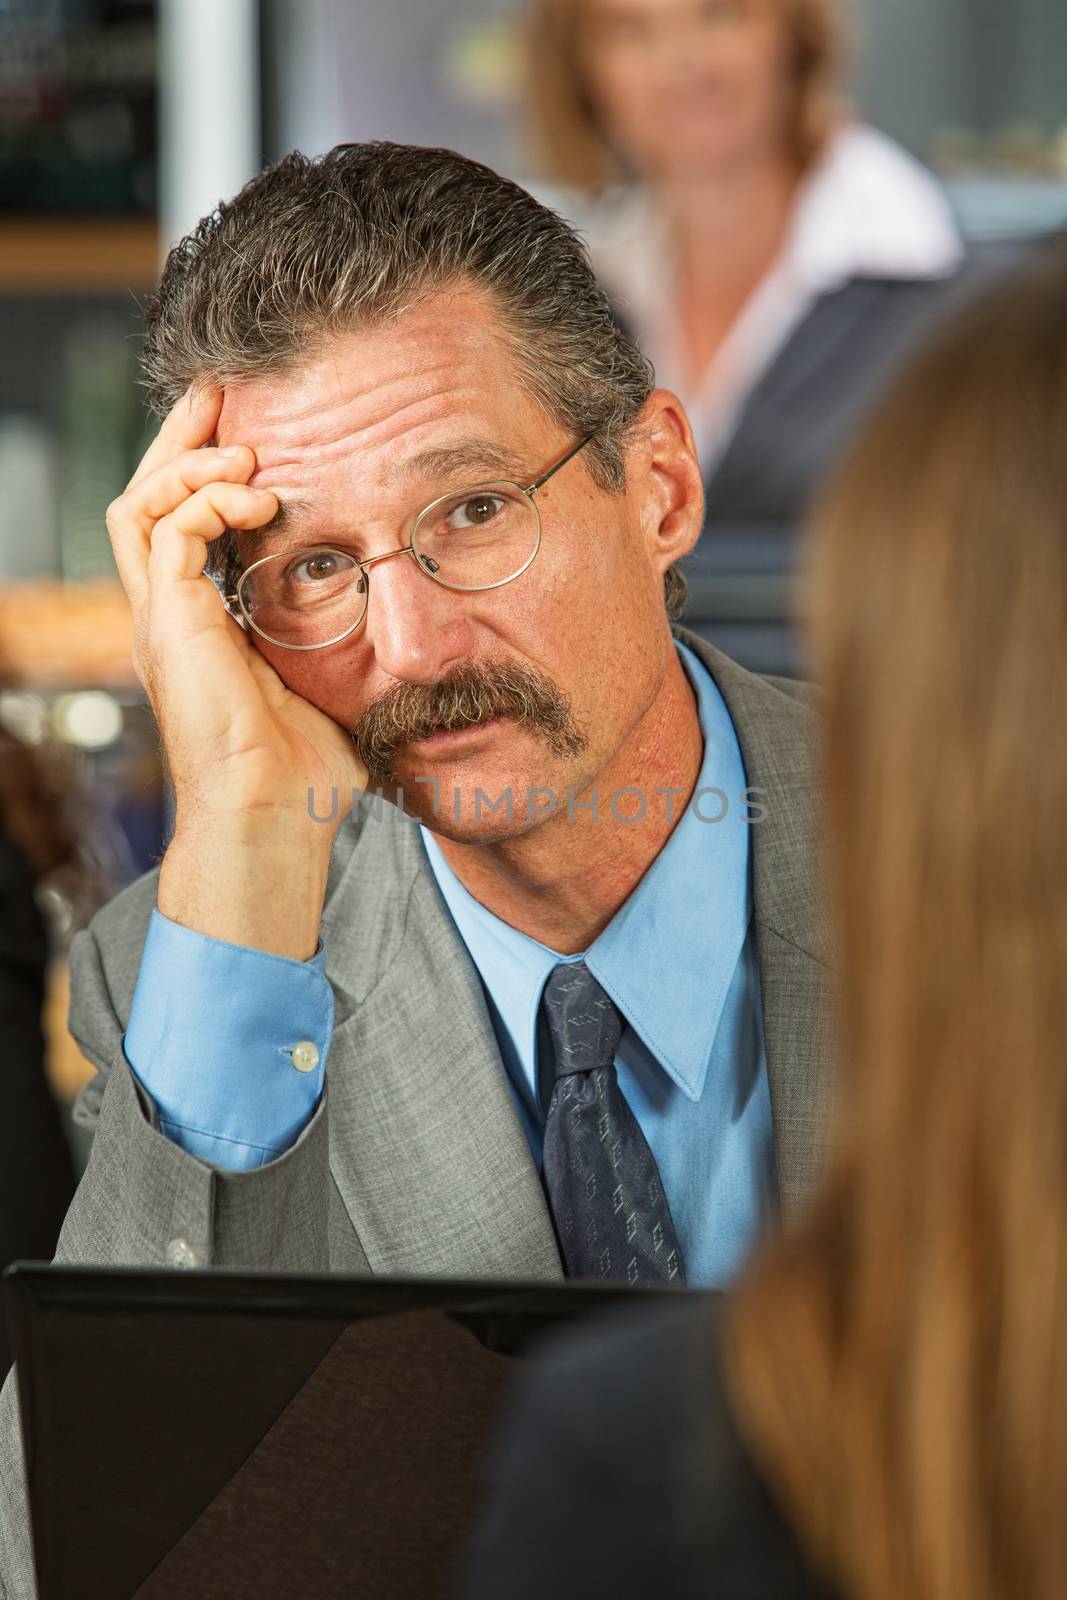 Sad businessman listening to woman in cafe